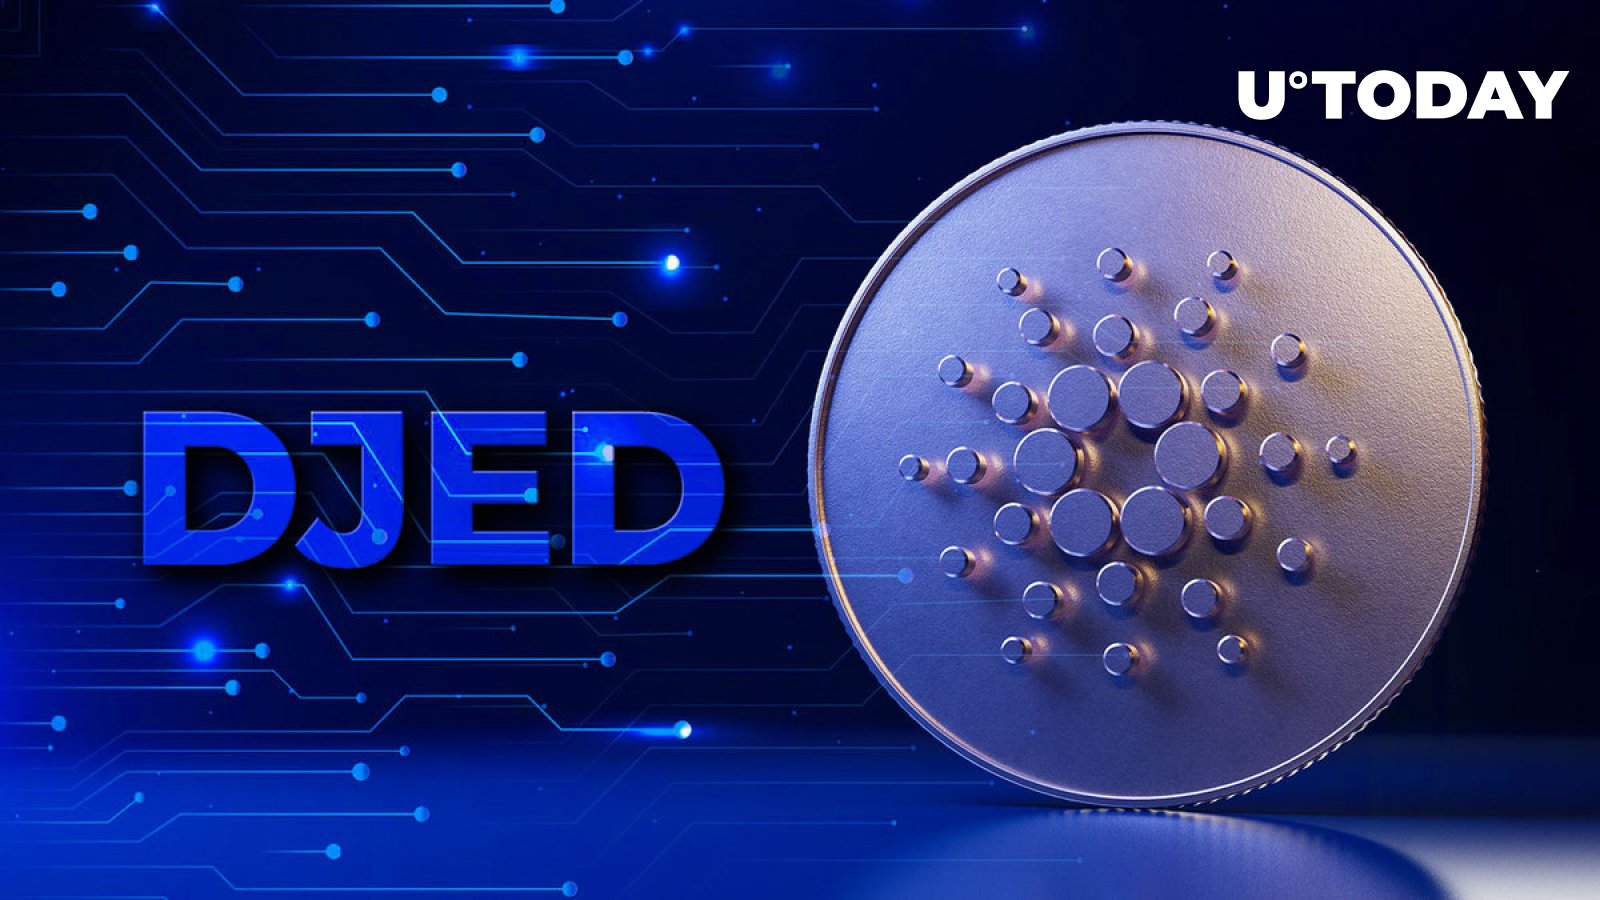 Cardano (ADA) to Launch Djed, Here’s What You Should Know About Algorithmic Stablecoin